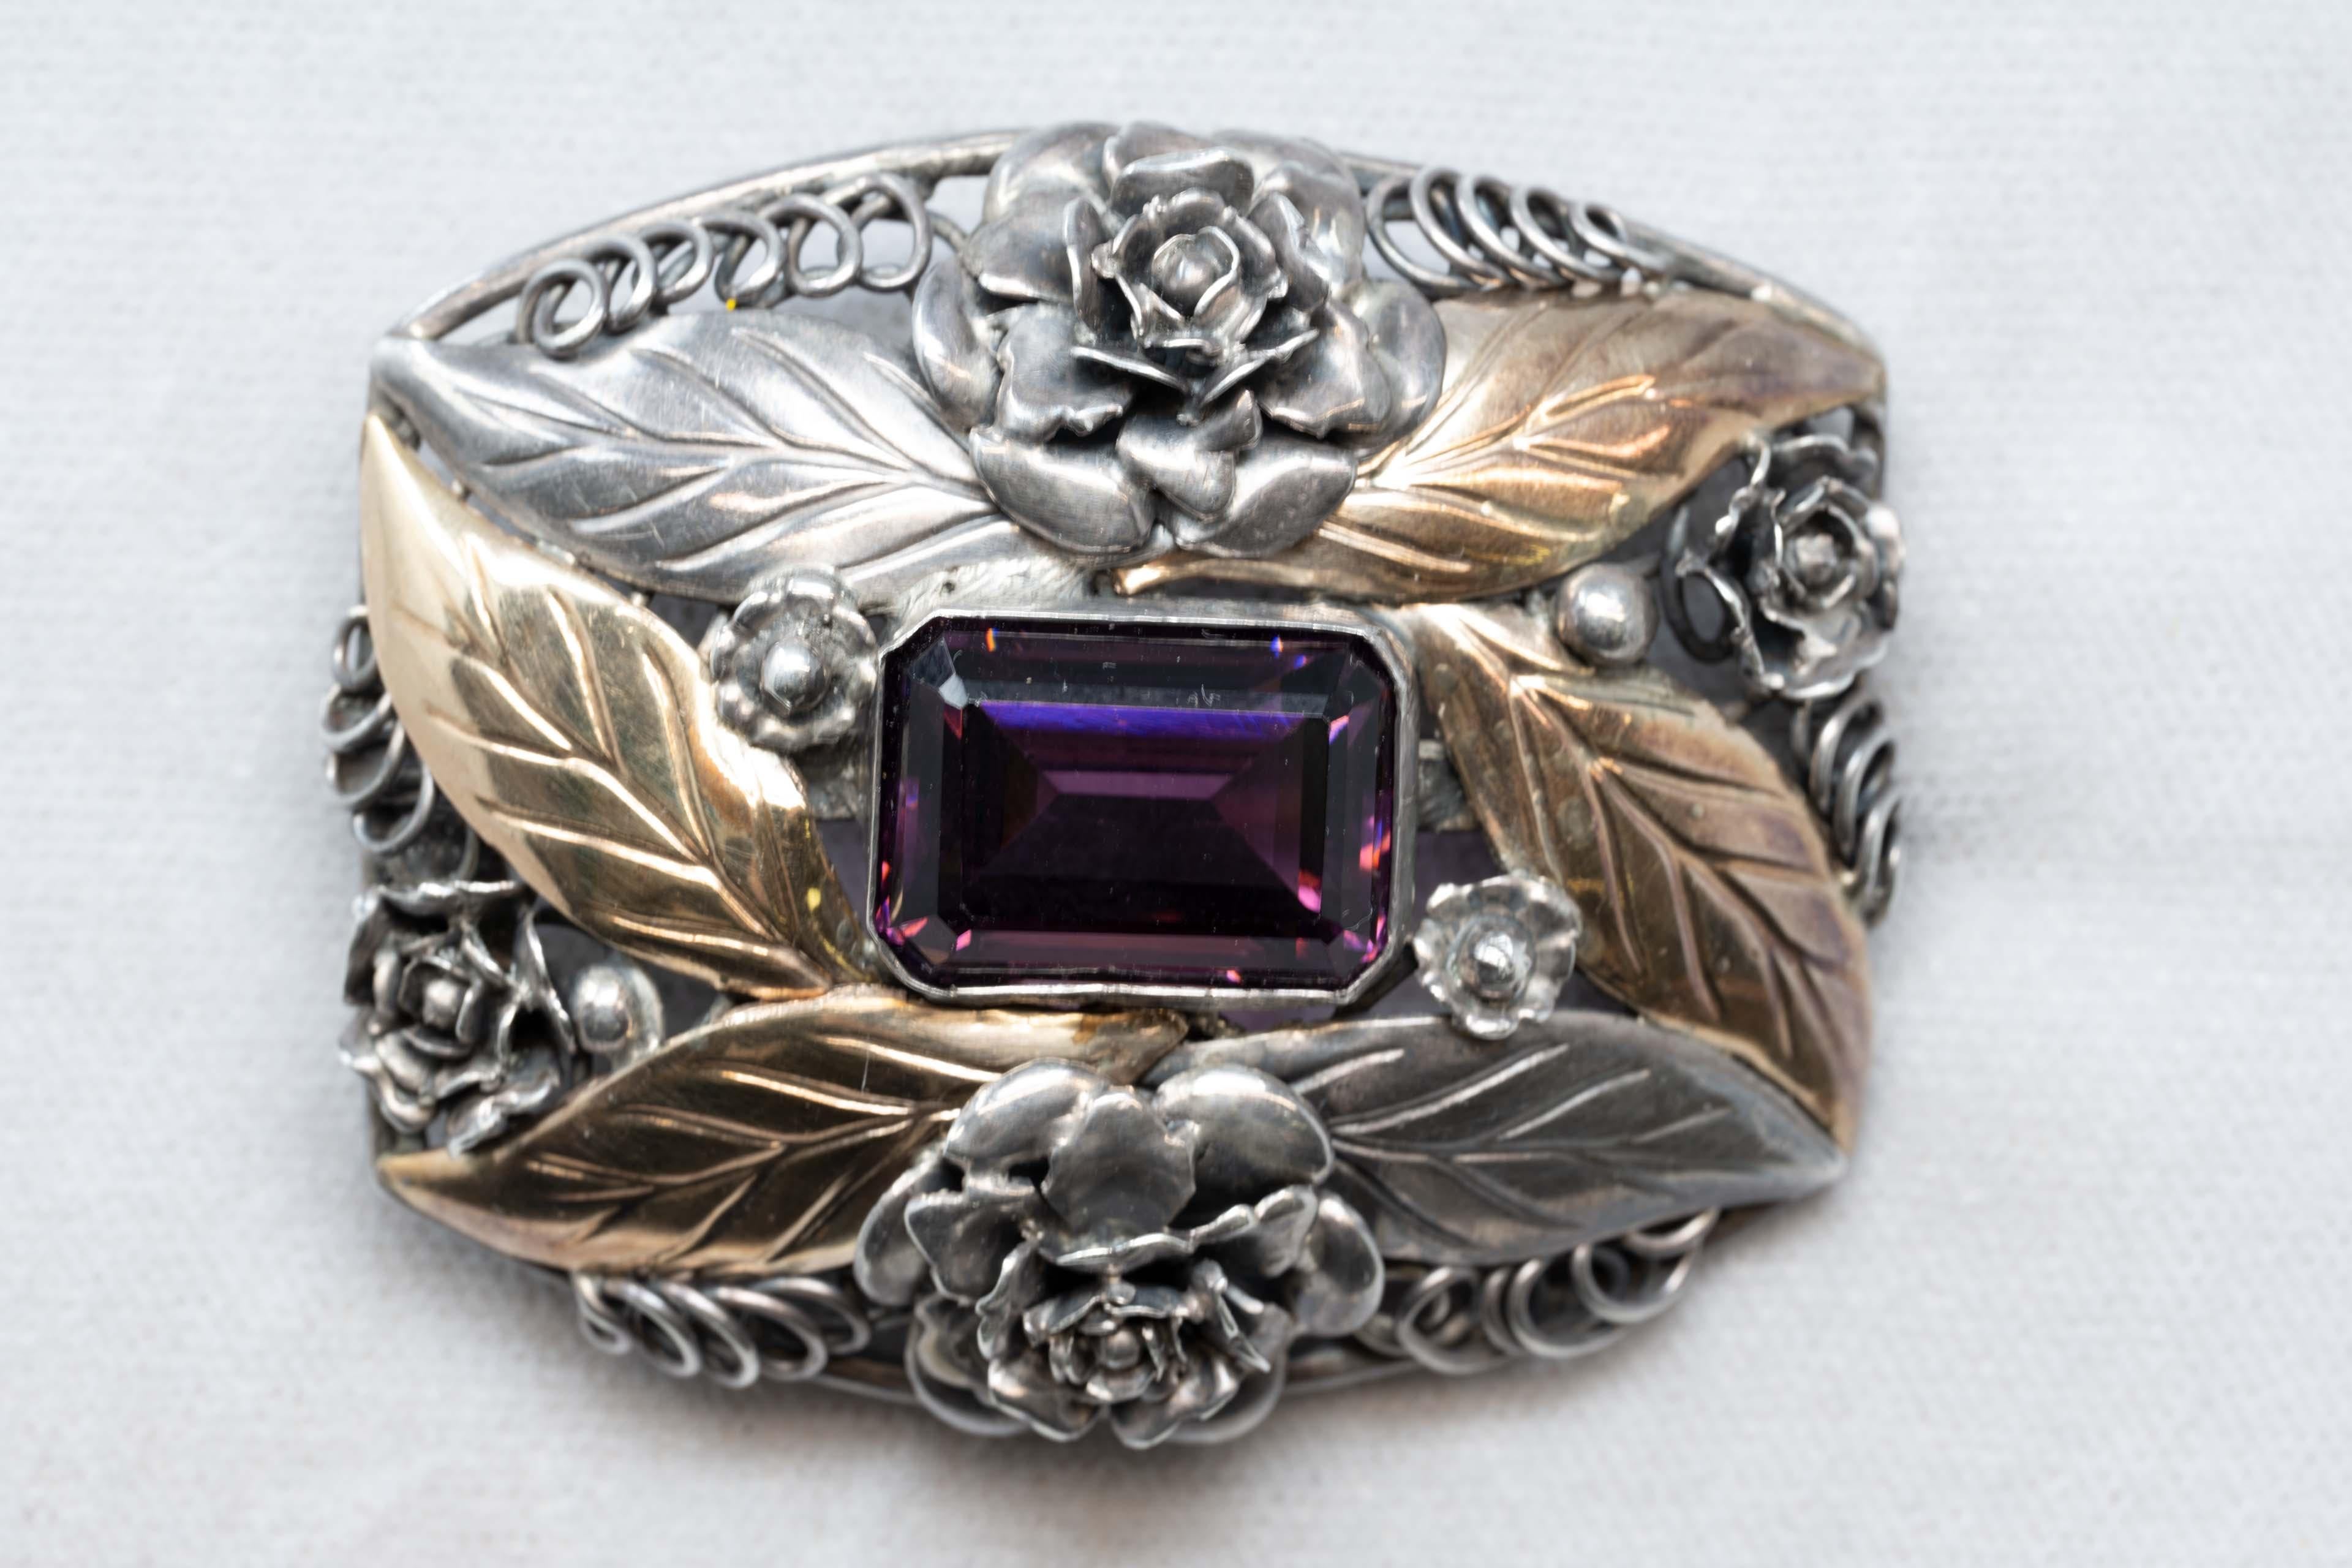 Art Nouveau sterling silver and gold brooch pendant made by Birks. Stamped on the back. Measures 56mm x 47mm, central amethyst color stone measures 15mm x 13mm and flower decoration. Made in Canada c. 1900, in good condition.
